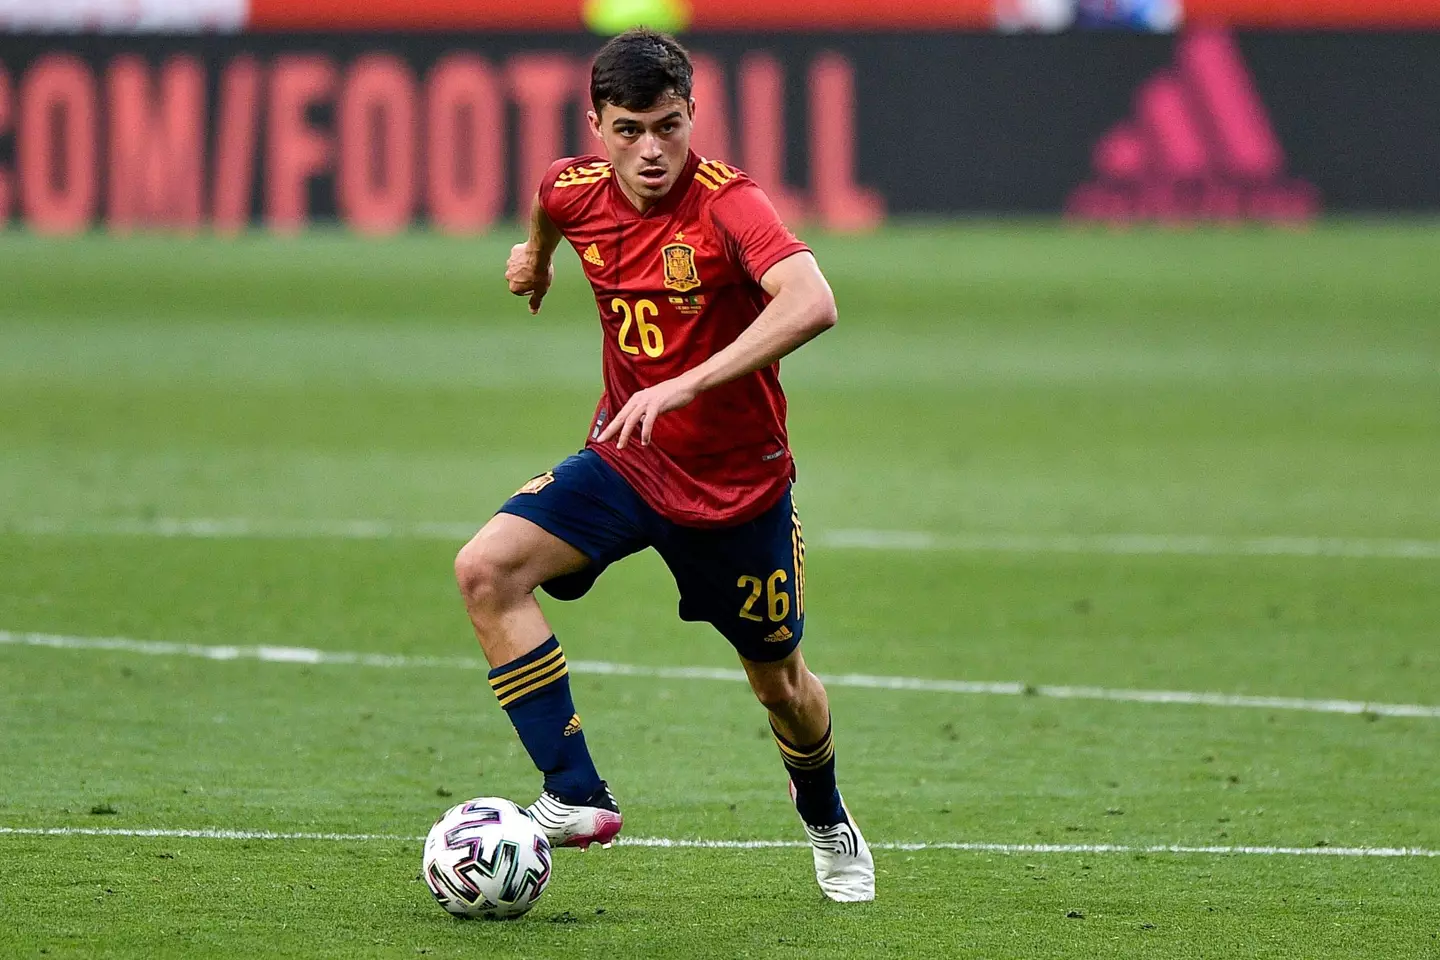 Pedri will be one of Spain's most important players in Qatar. Image: Alamy